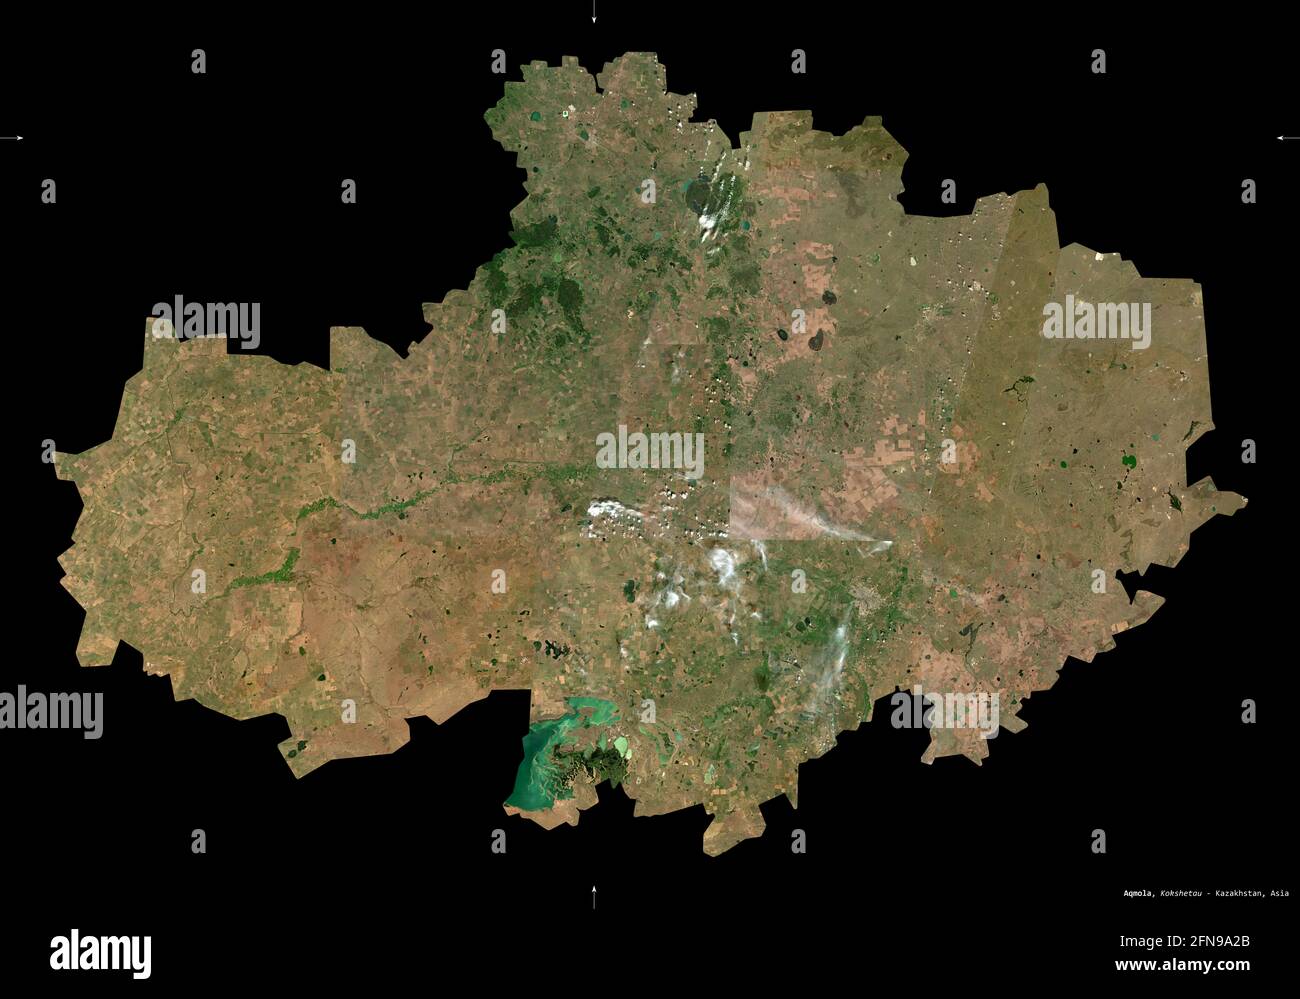 Aqmola, region of Kazakhstan. Sentinel-2 satellite imagery. Shape isolated on black. Description, location of the capital. Contains modified Copernicu Stock Photo